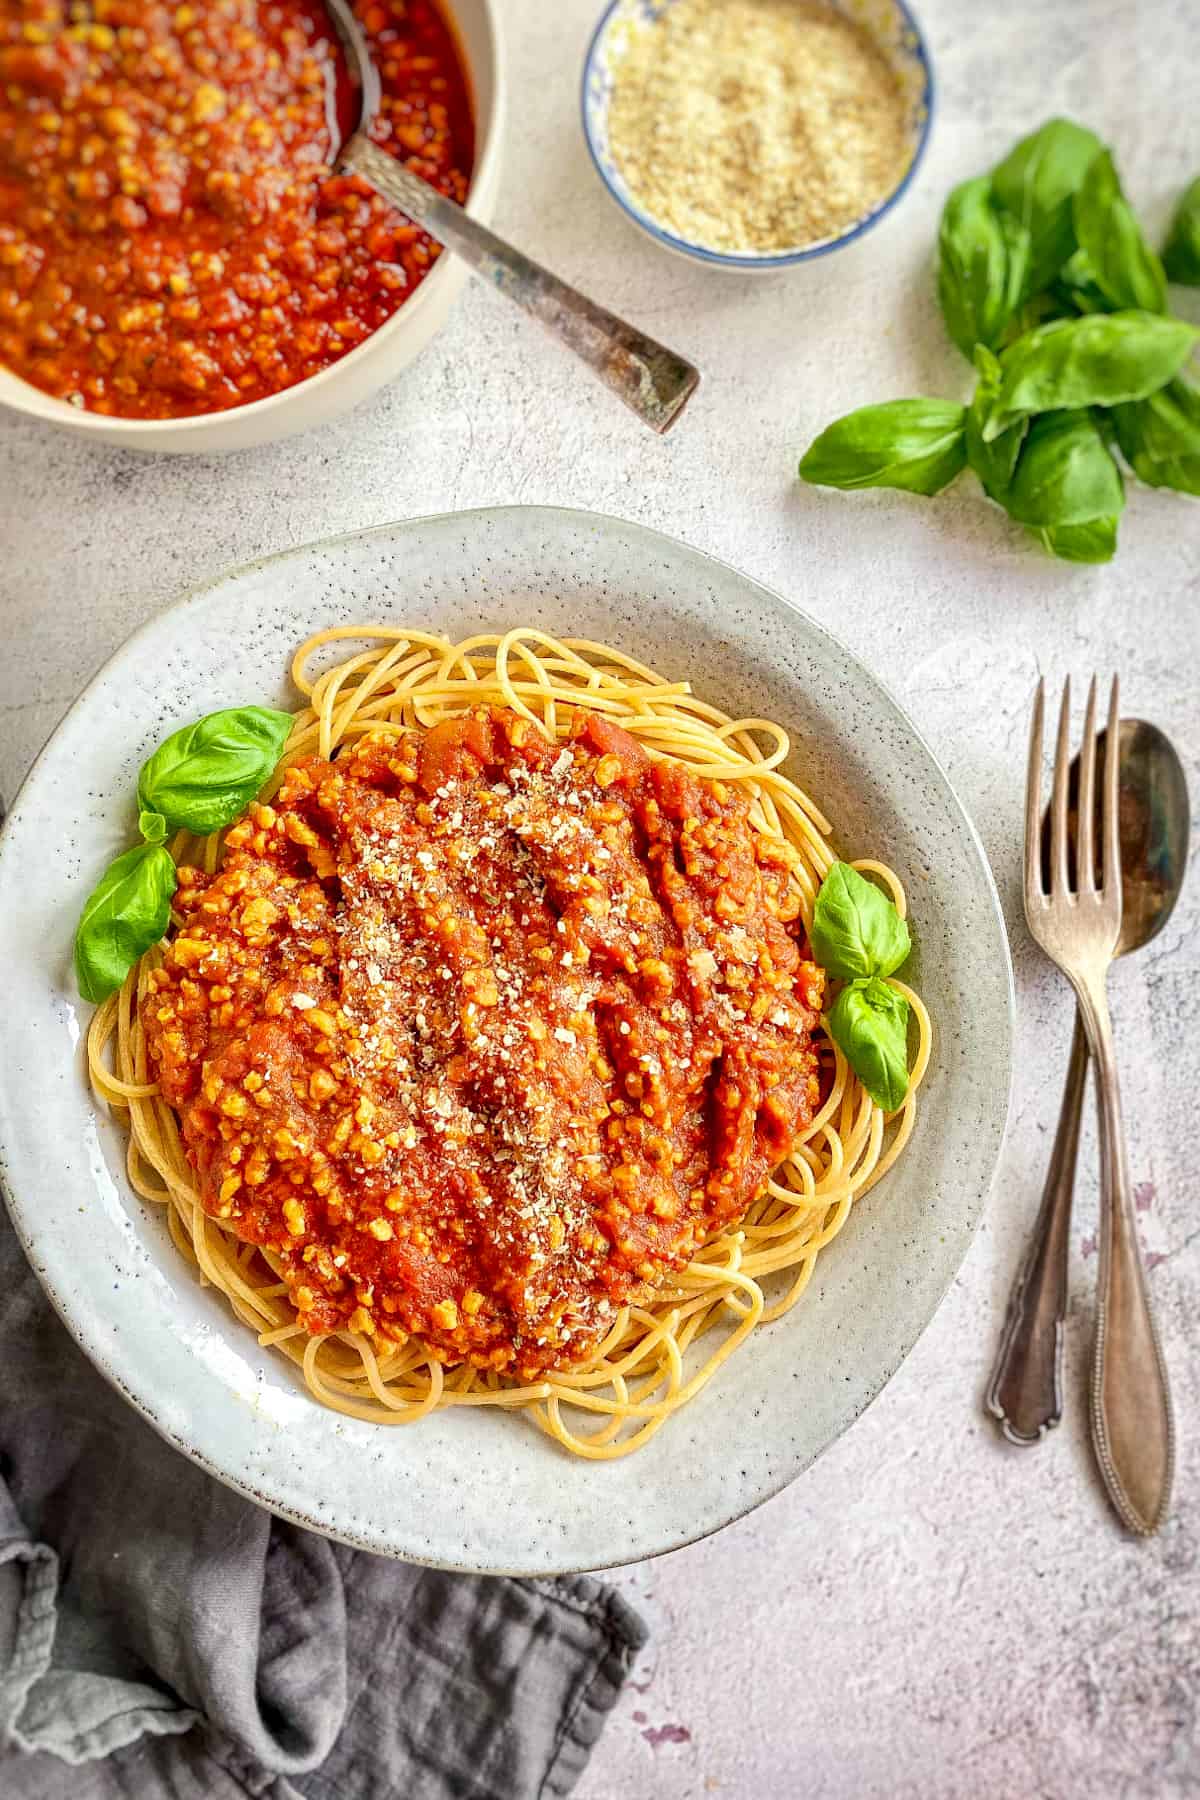 Plate of vegan spaghetti with "meat" sauce.